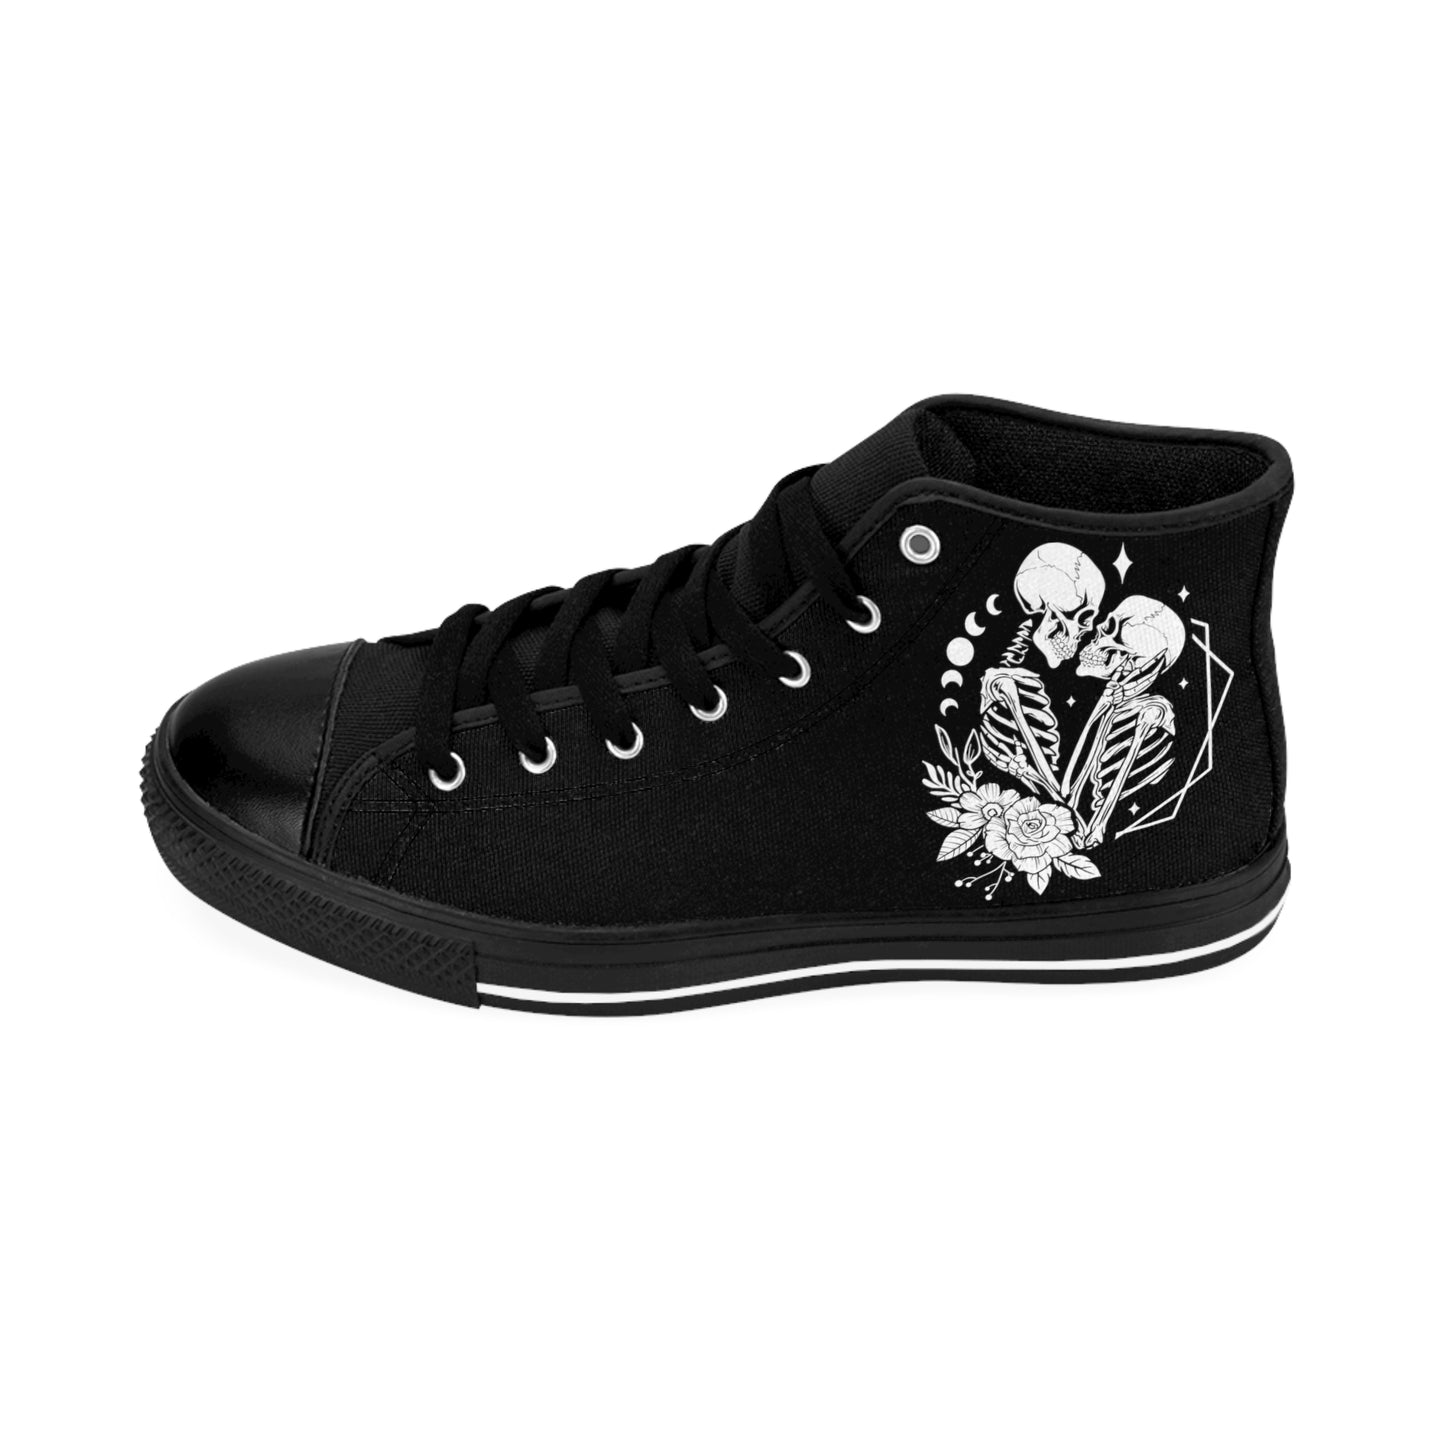 The Lovers Moon Eclipse Women's Classic Sneakers